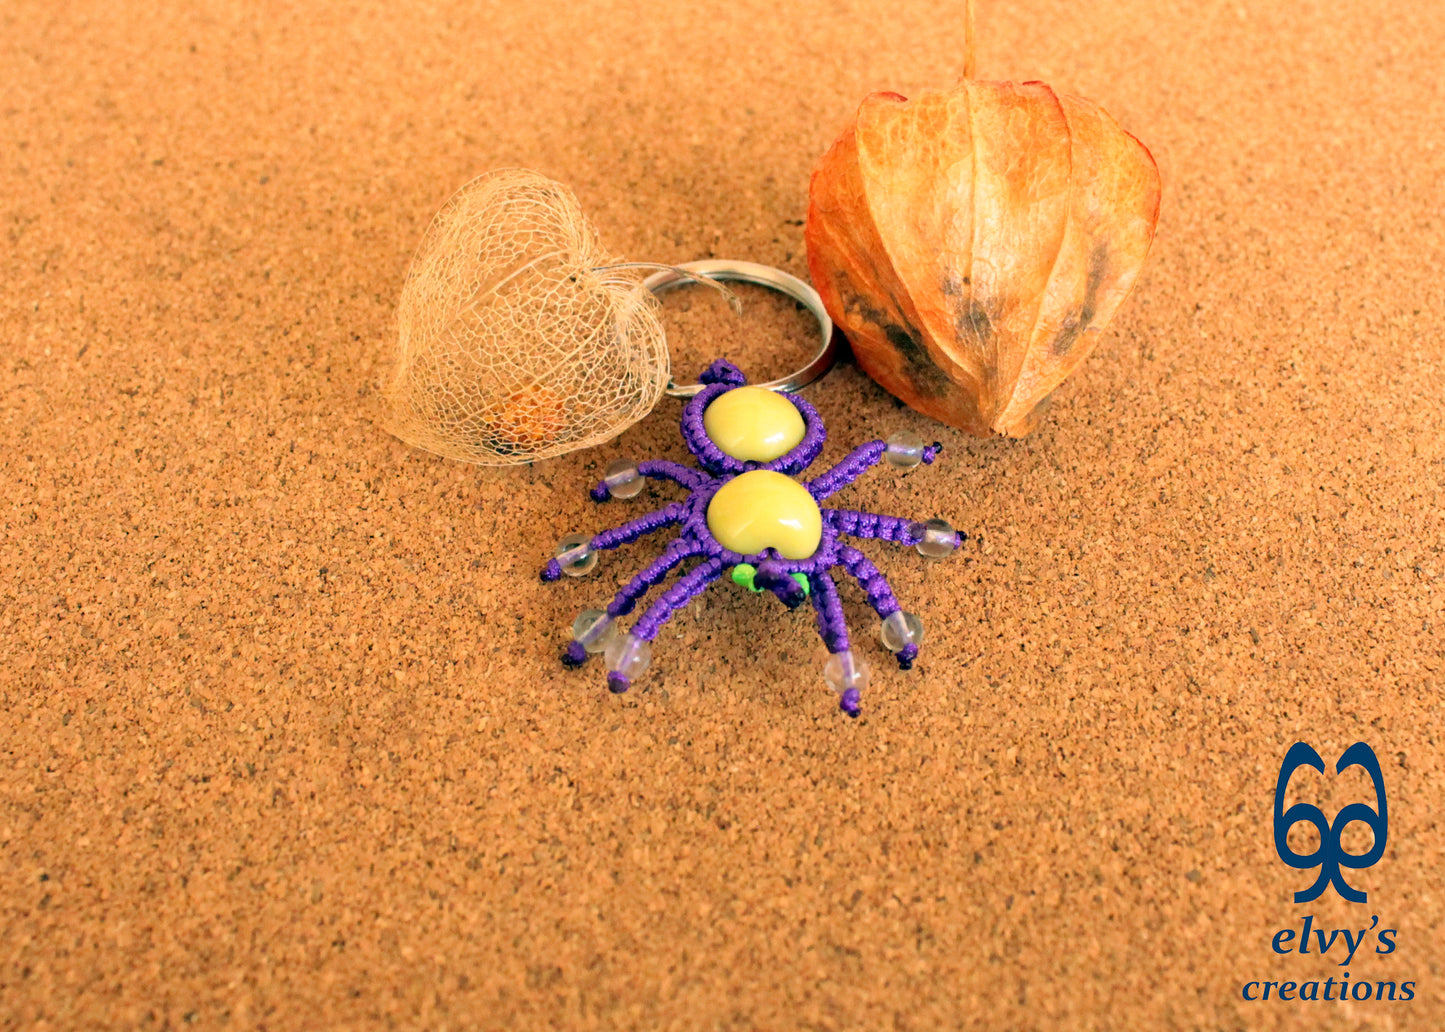 Handmade Spider Macrame Key Chain, Halloween Gift, Small Unique Gift for Woman and Man